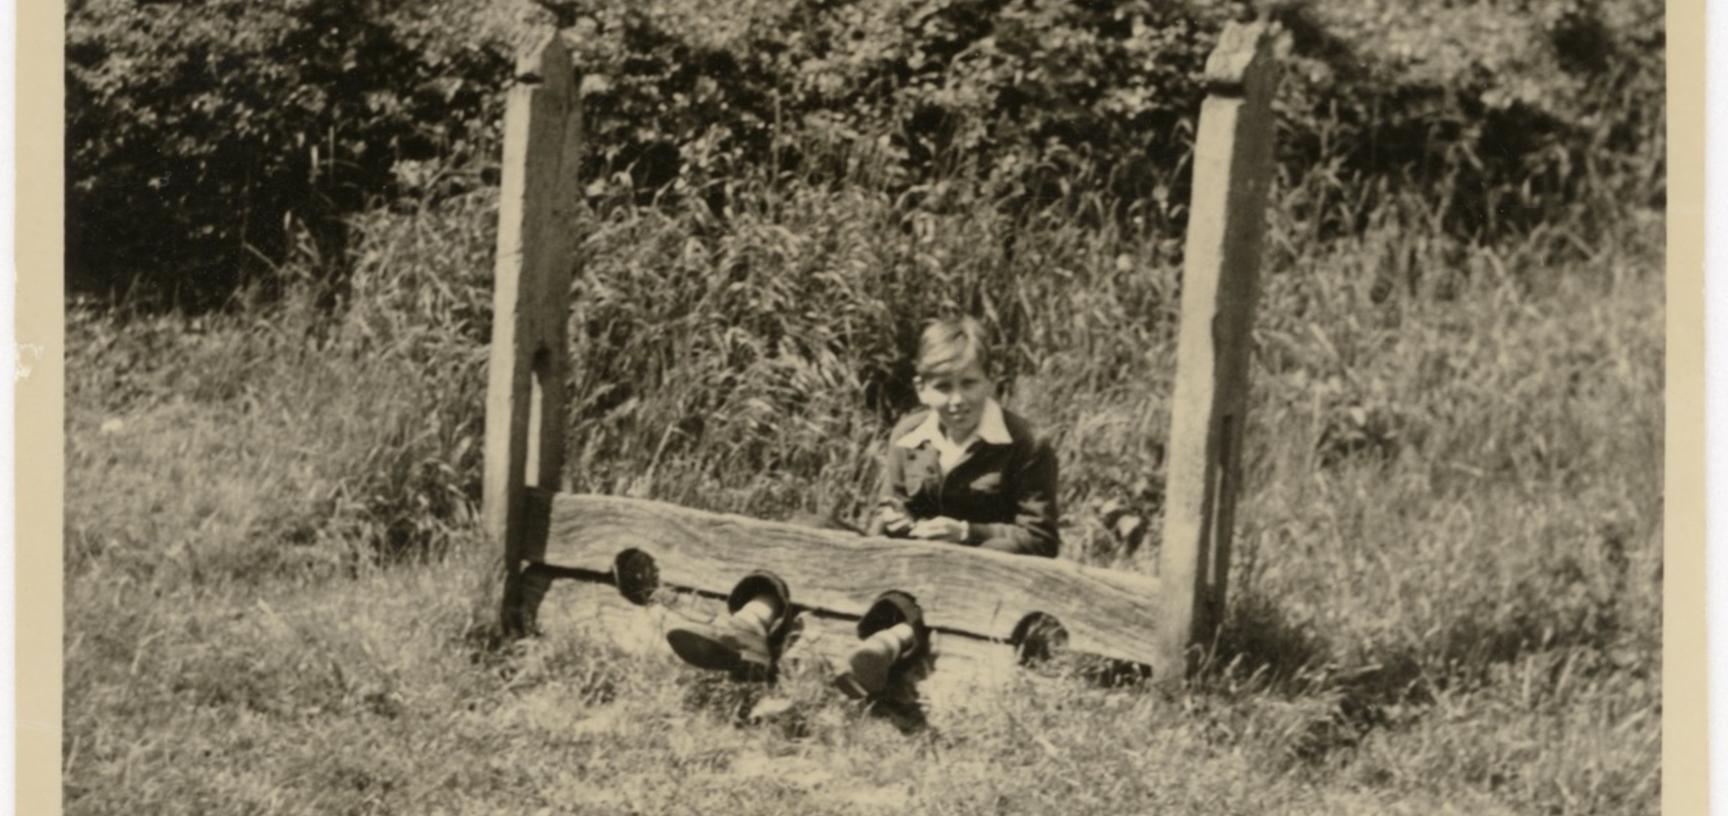 Boy sitting on a wooden structure in the countryside.